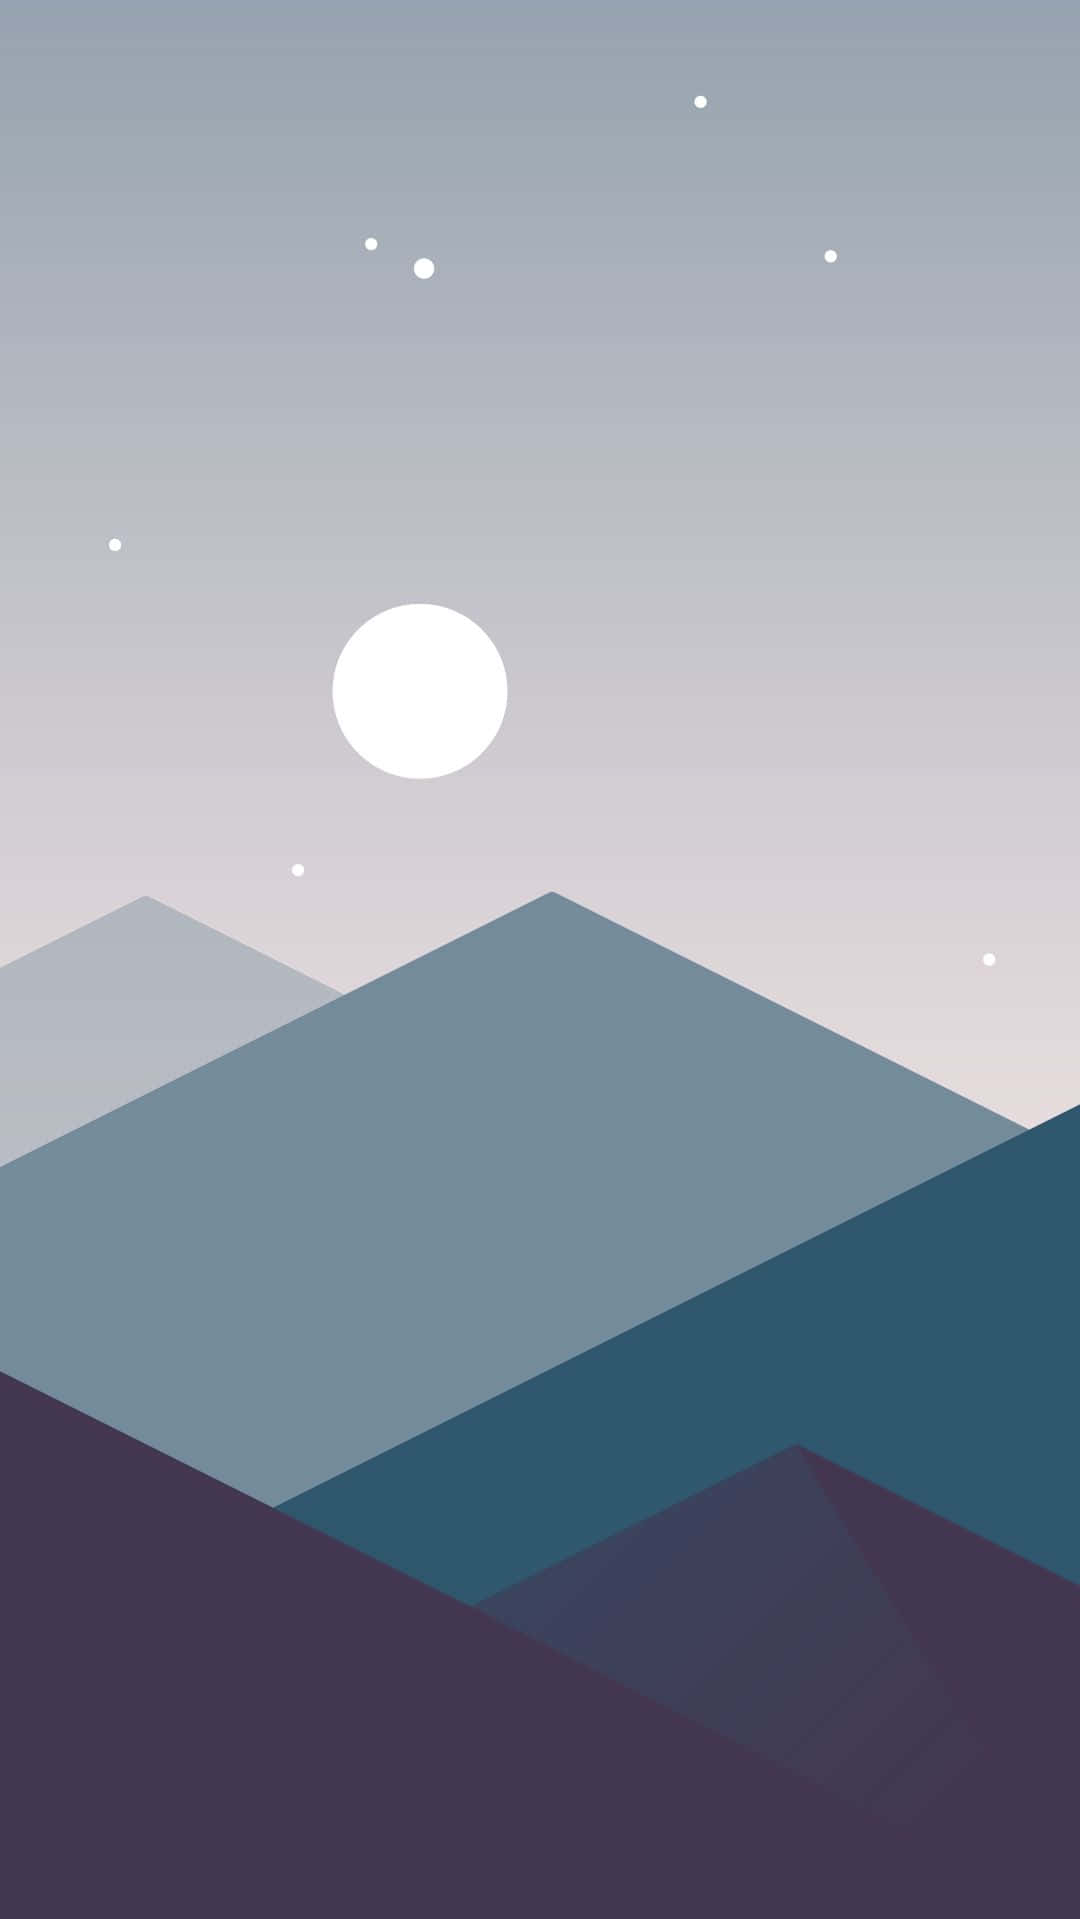 A Mountain Landscape With A Moon And Stars